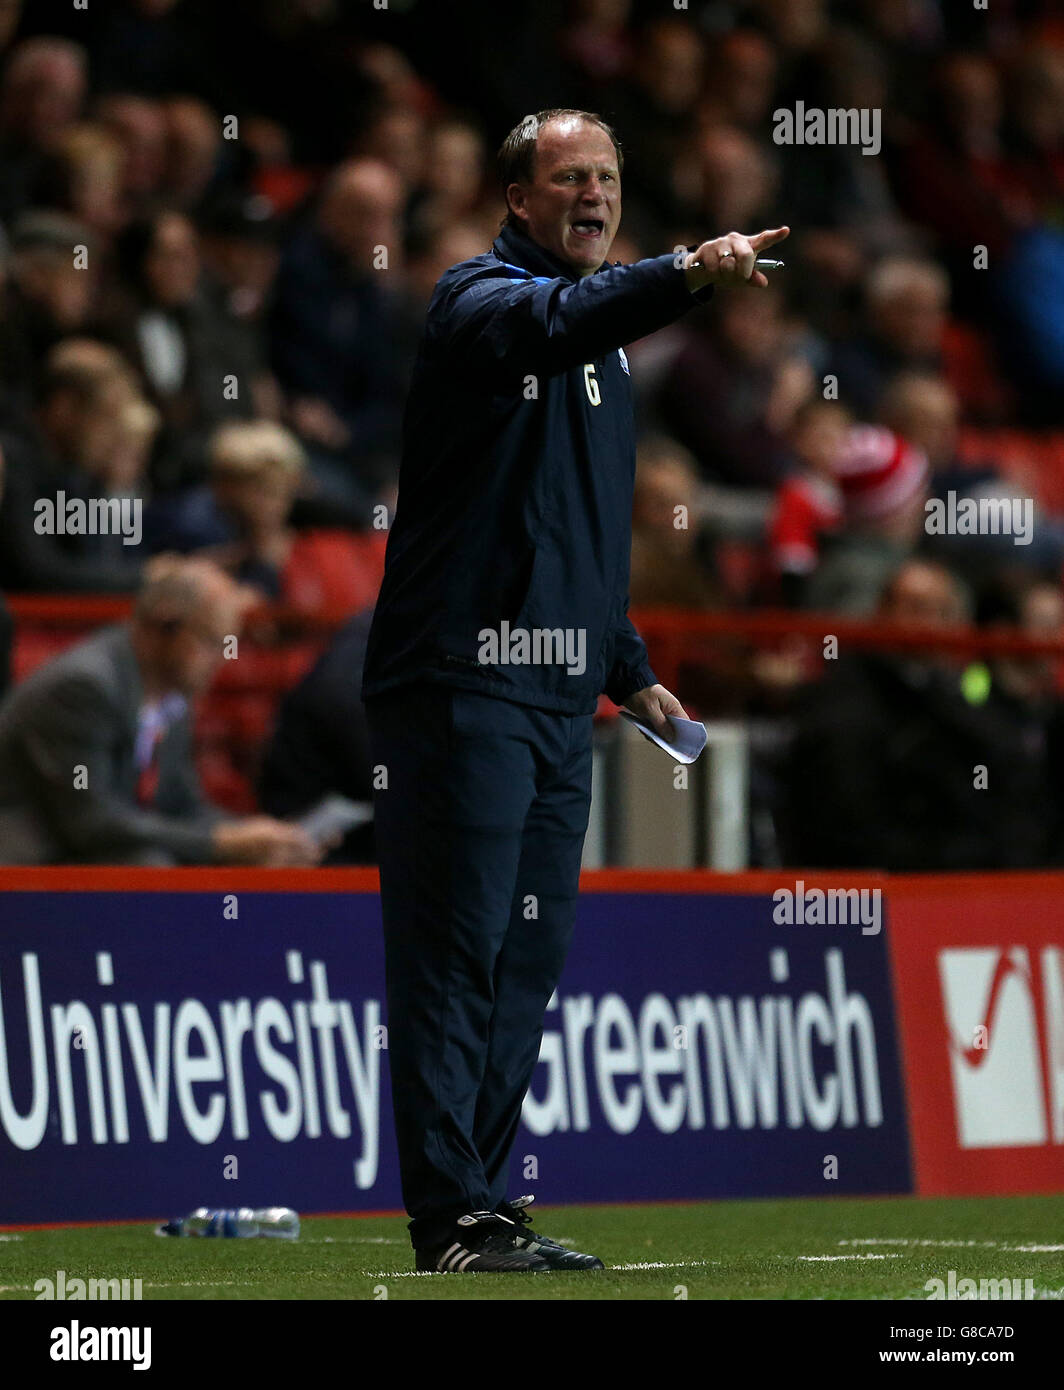 Soccer - Sky Bet Championship - Charlton Athletic v Preston North End - The Valley. Preston North End manager Simon Grayson gestures on the touchline Stock Photo